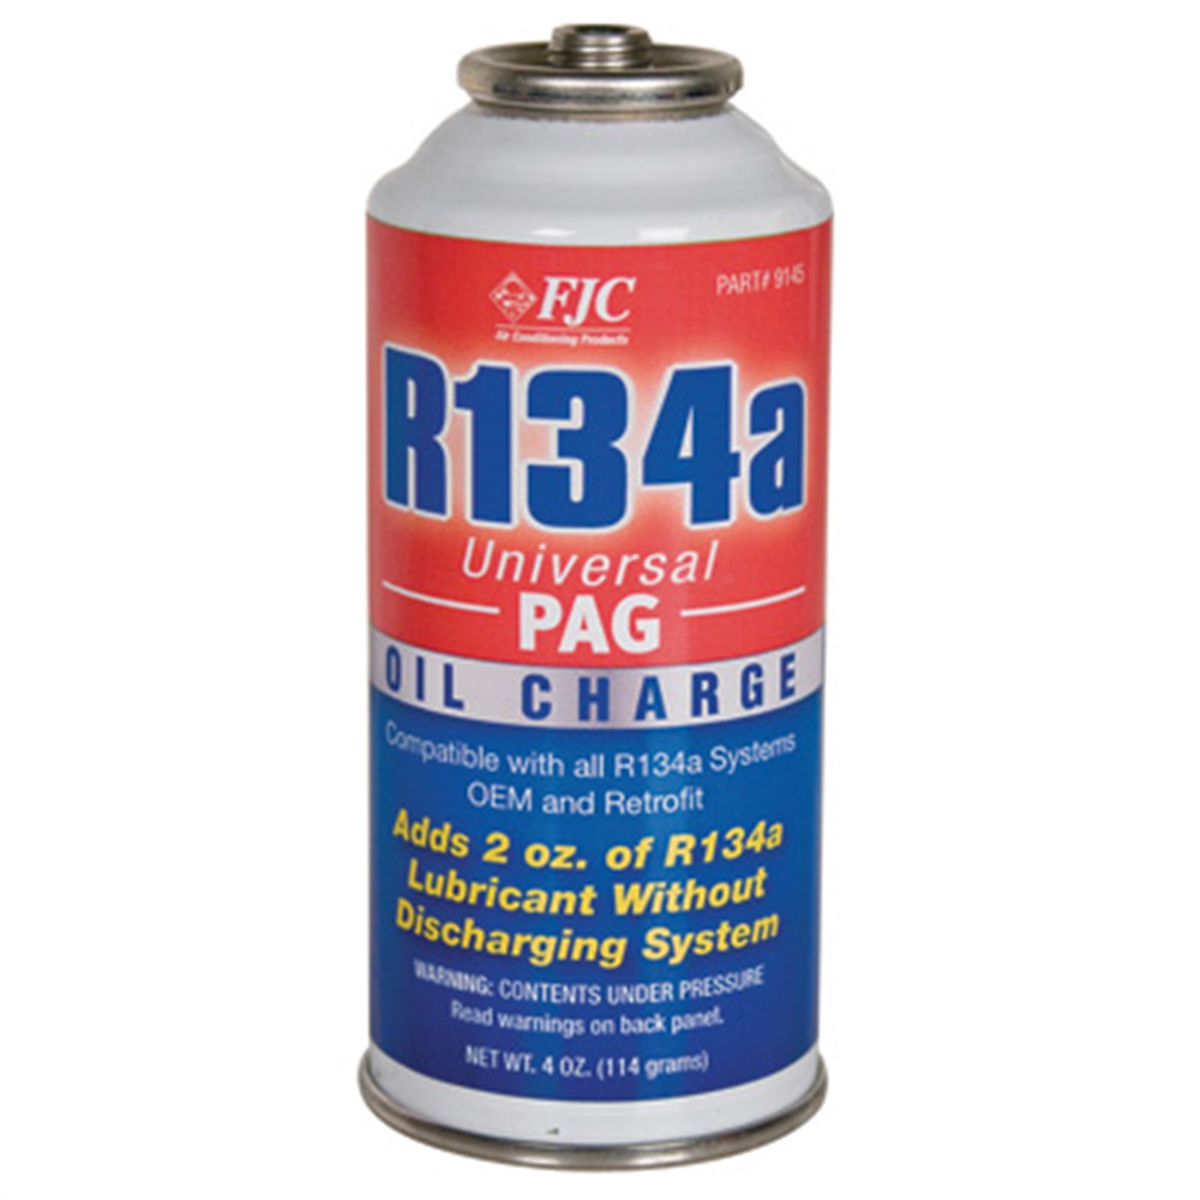 R134A UNIVERSAL PAG OIL CHARGE